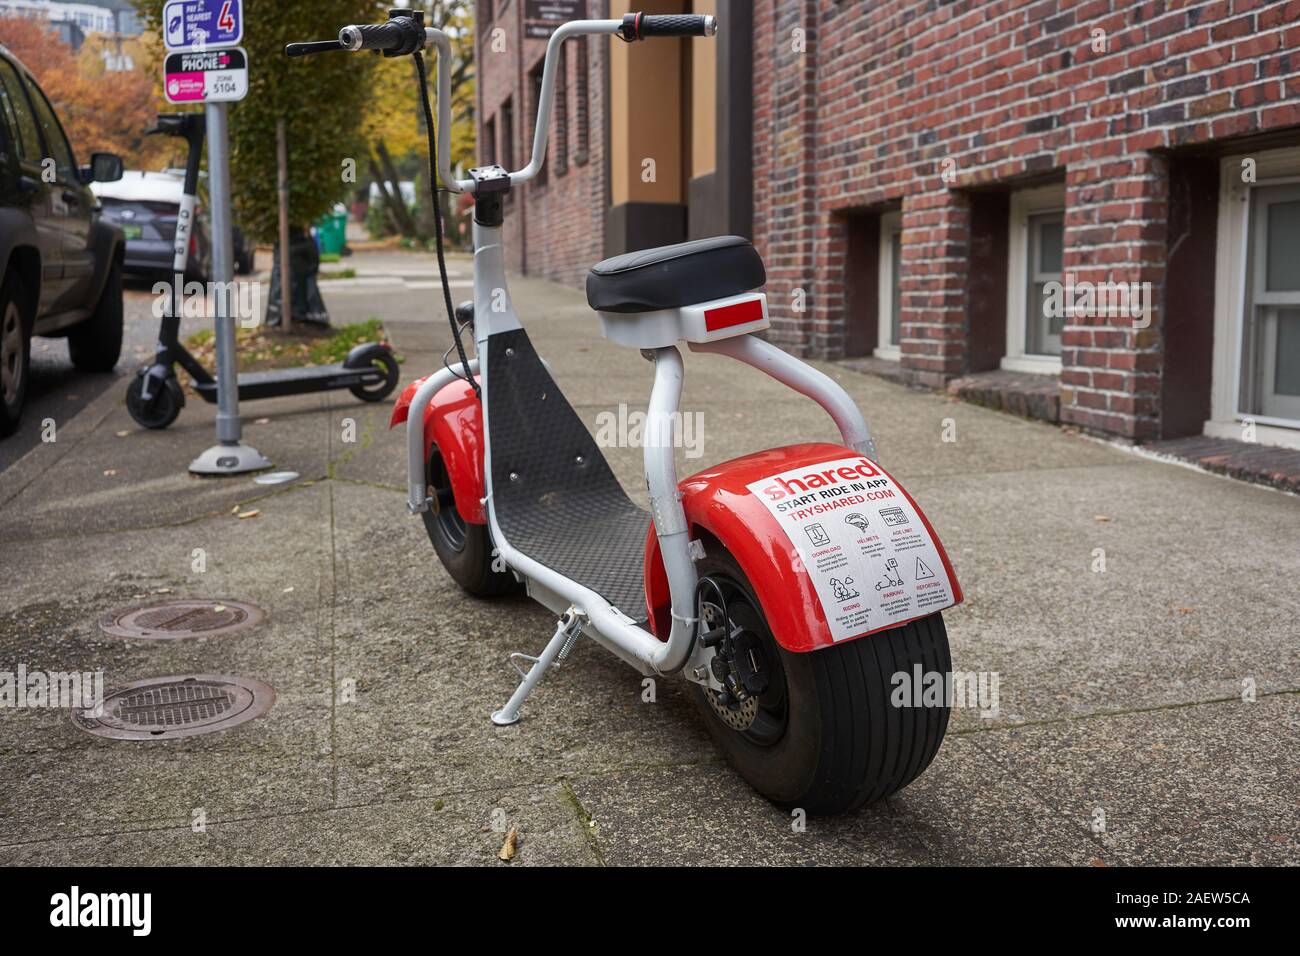 A Shared Zoomer big wheel electric scooter owned by Shared Technologies